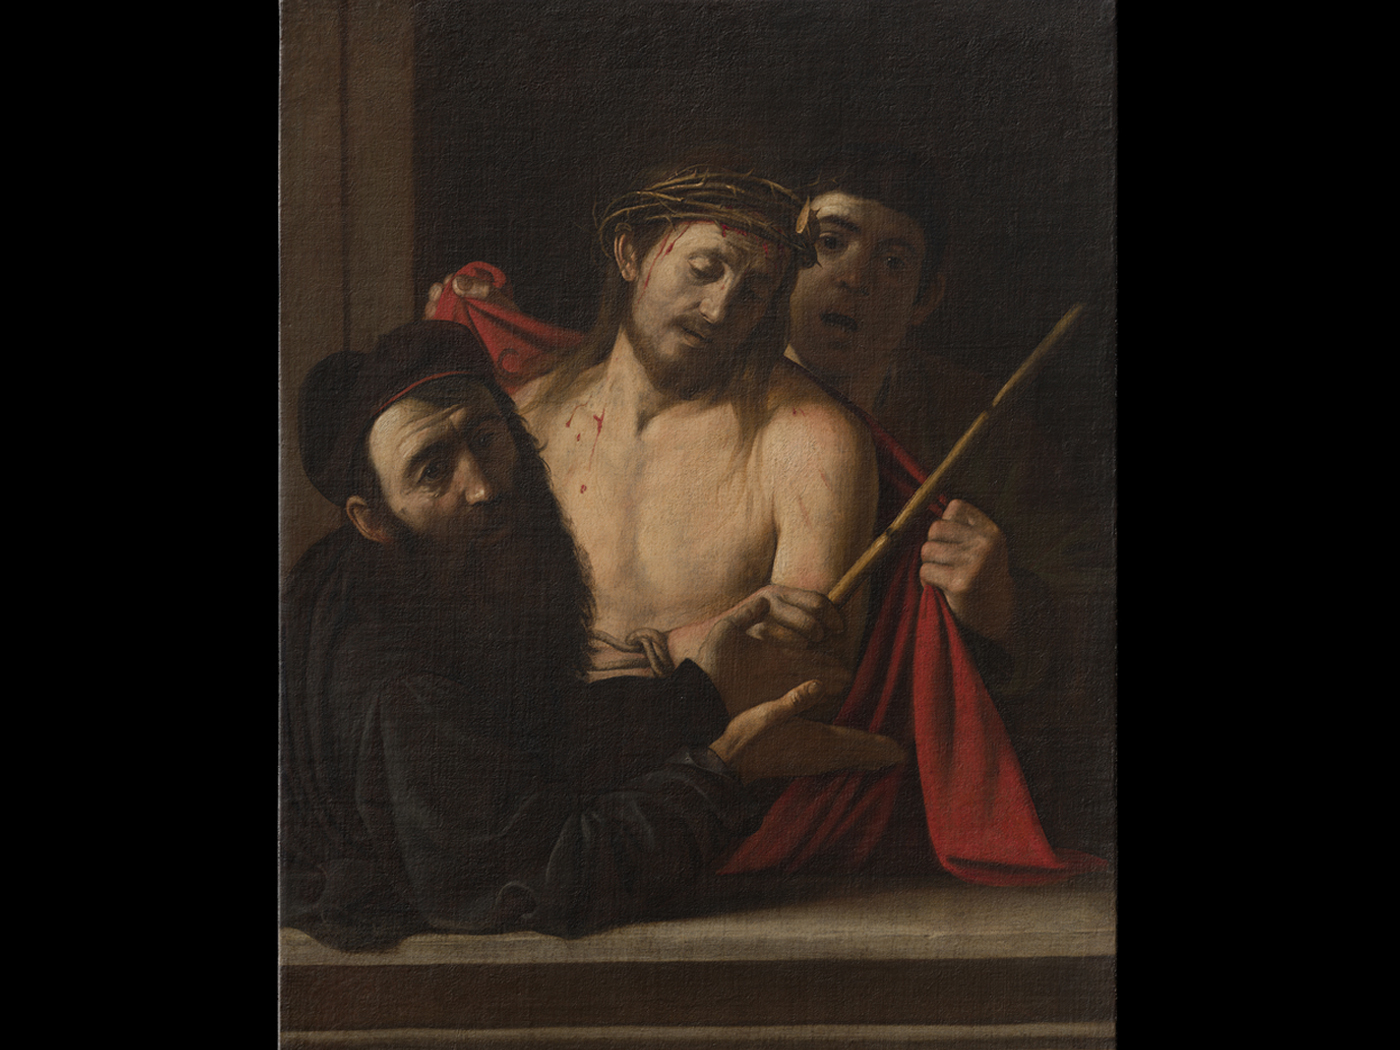 spain's prado museum will showcase a lost caravaggio that nearly sold for under $2,000